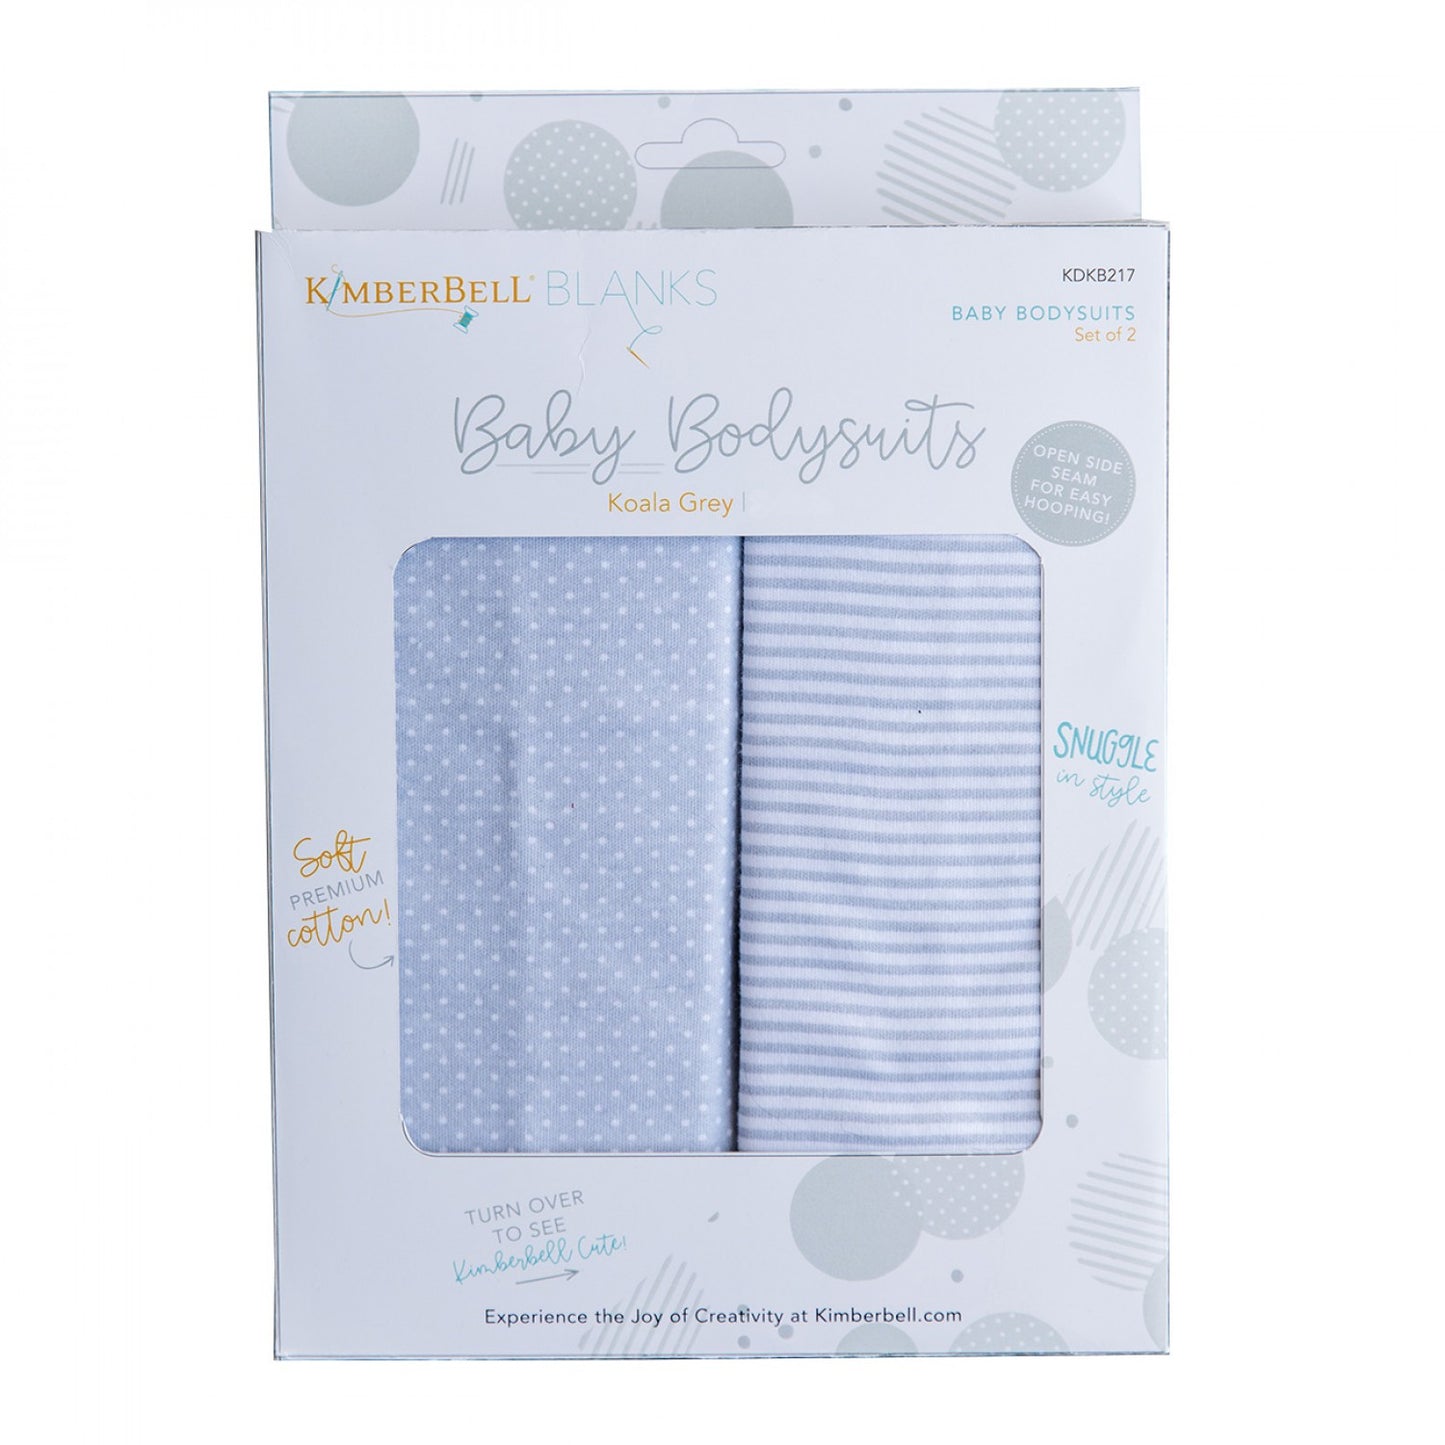 Kimberbell Baby Bodysuits, Multiple Sizes and Colors